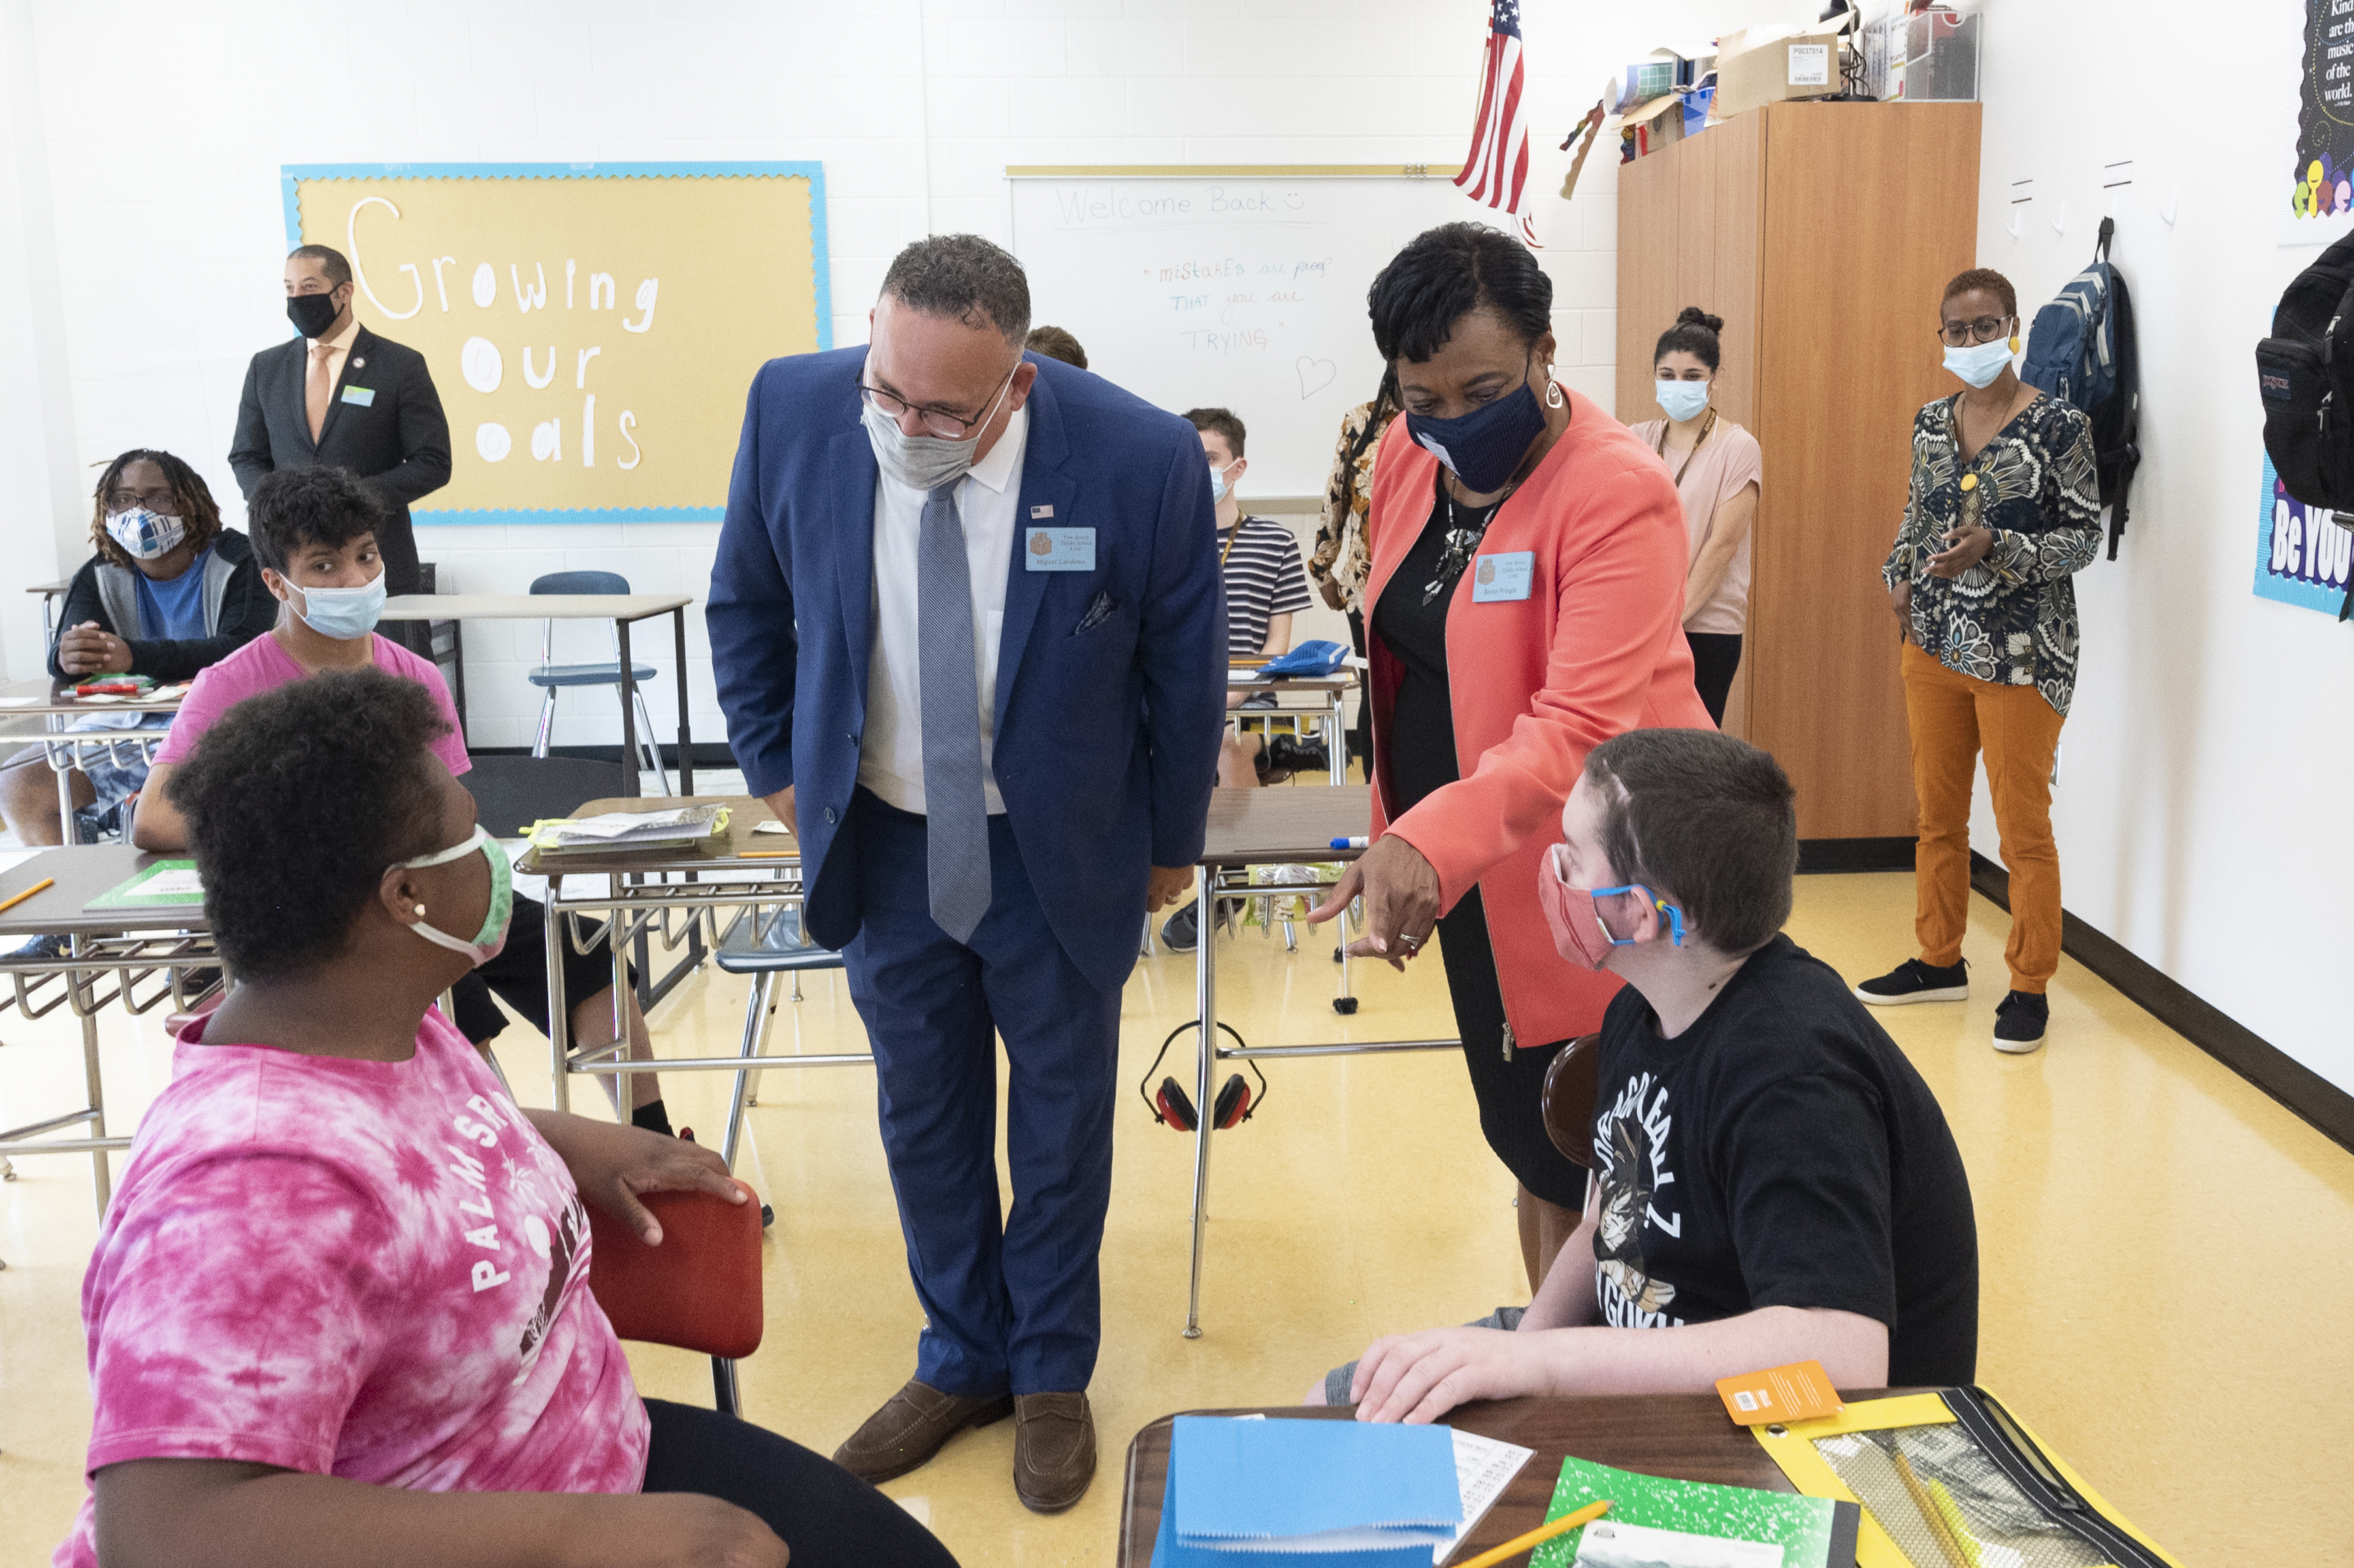 U.S. Education Secretary Miguel Cardona and National Education Association President Becky Pringle meet with students and teachers at Delran High School